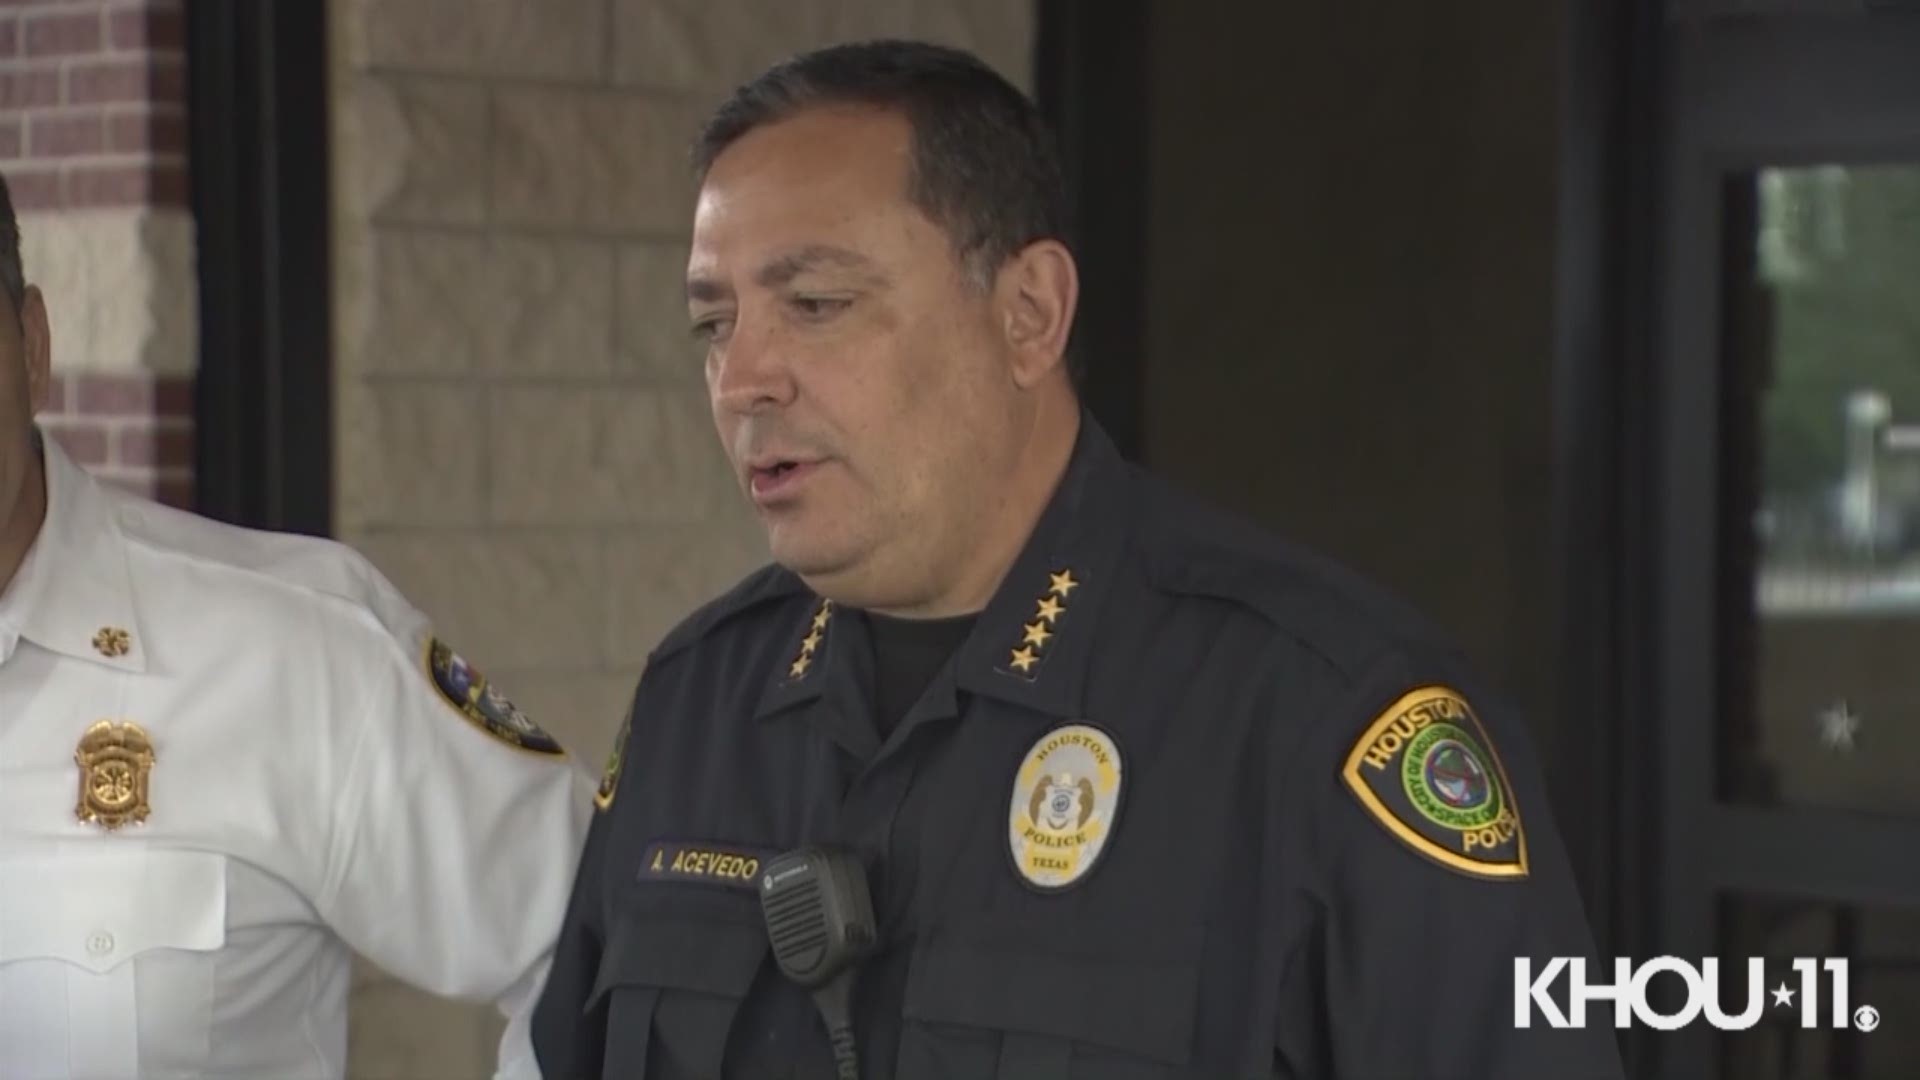 Houston Police Chief Art Acevedo spoke on the new "stay home, work safe" order issued by the city and Harris County to stop the spread of COVID-19.